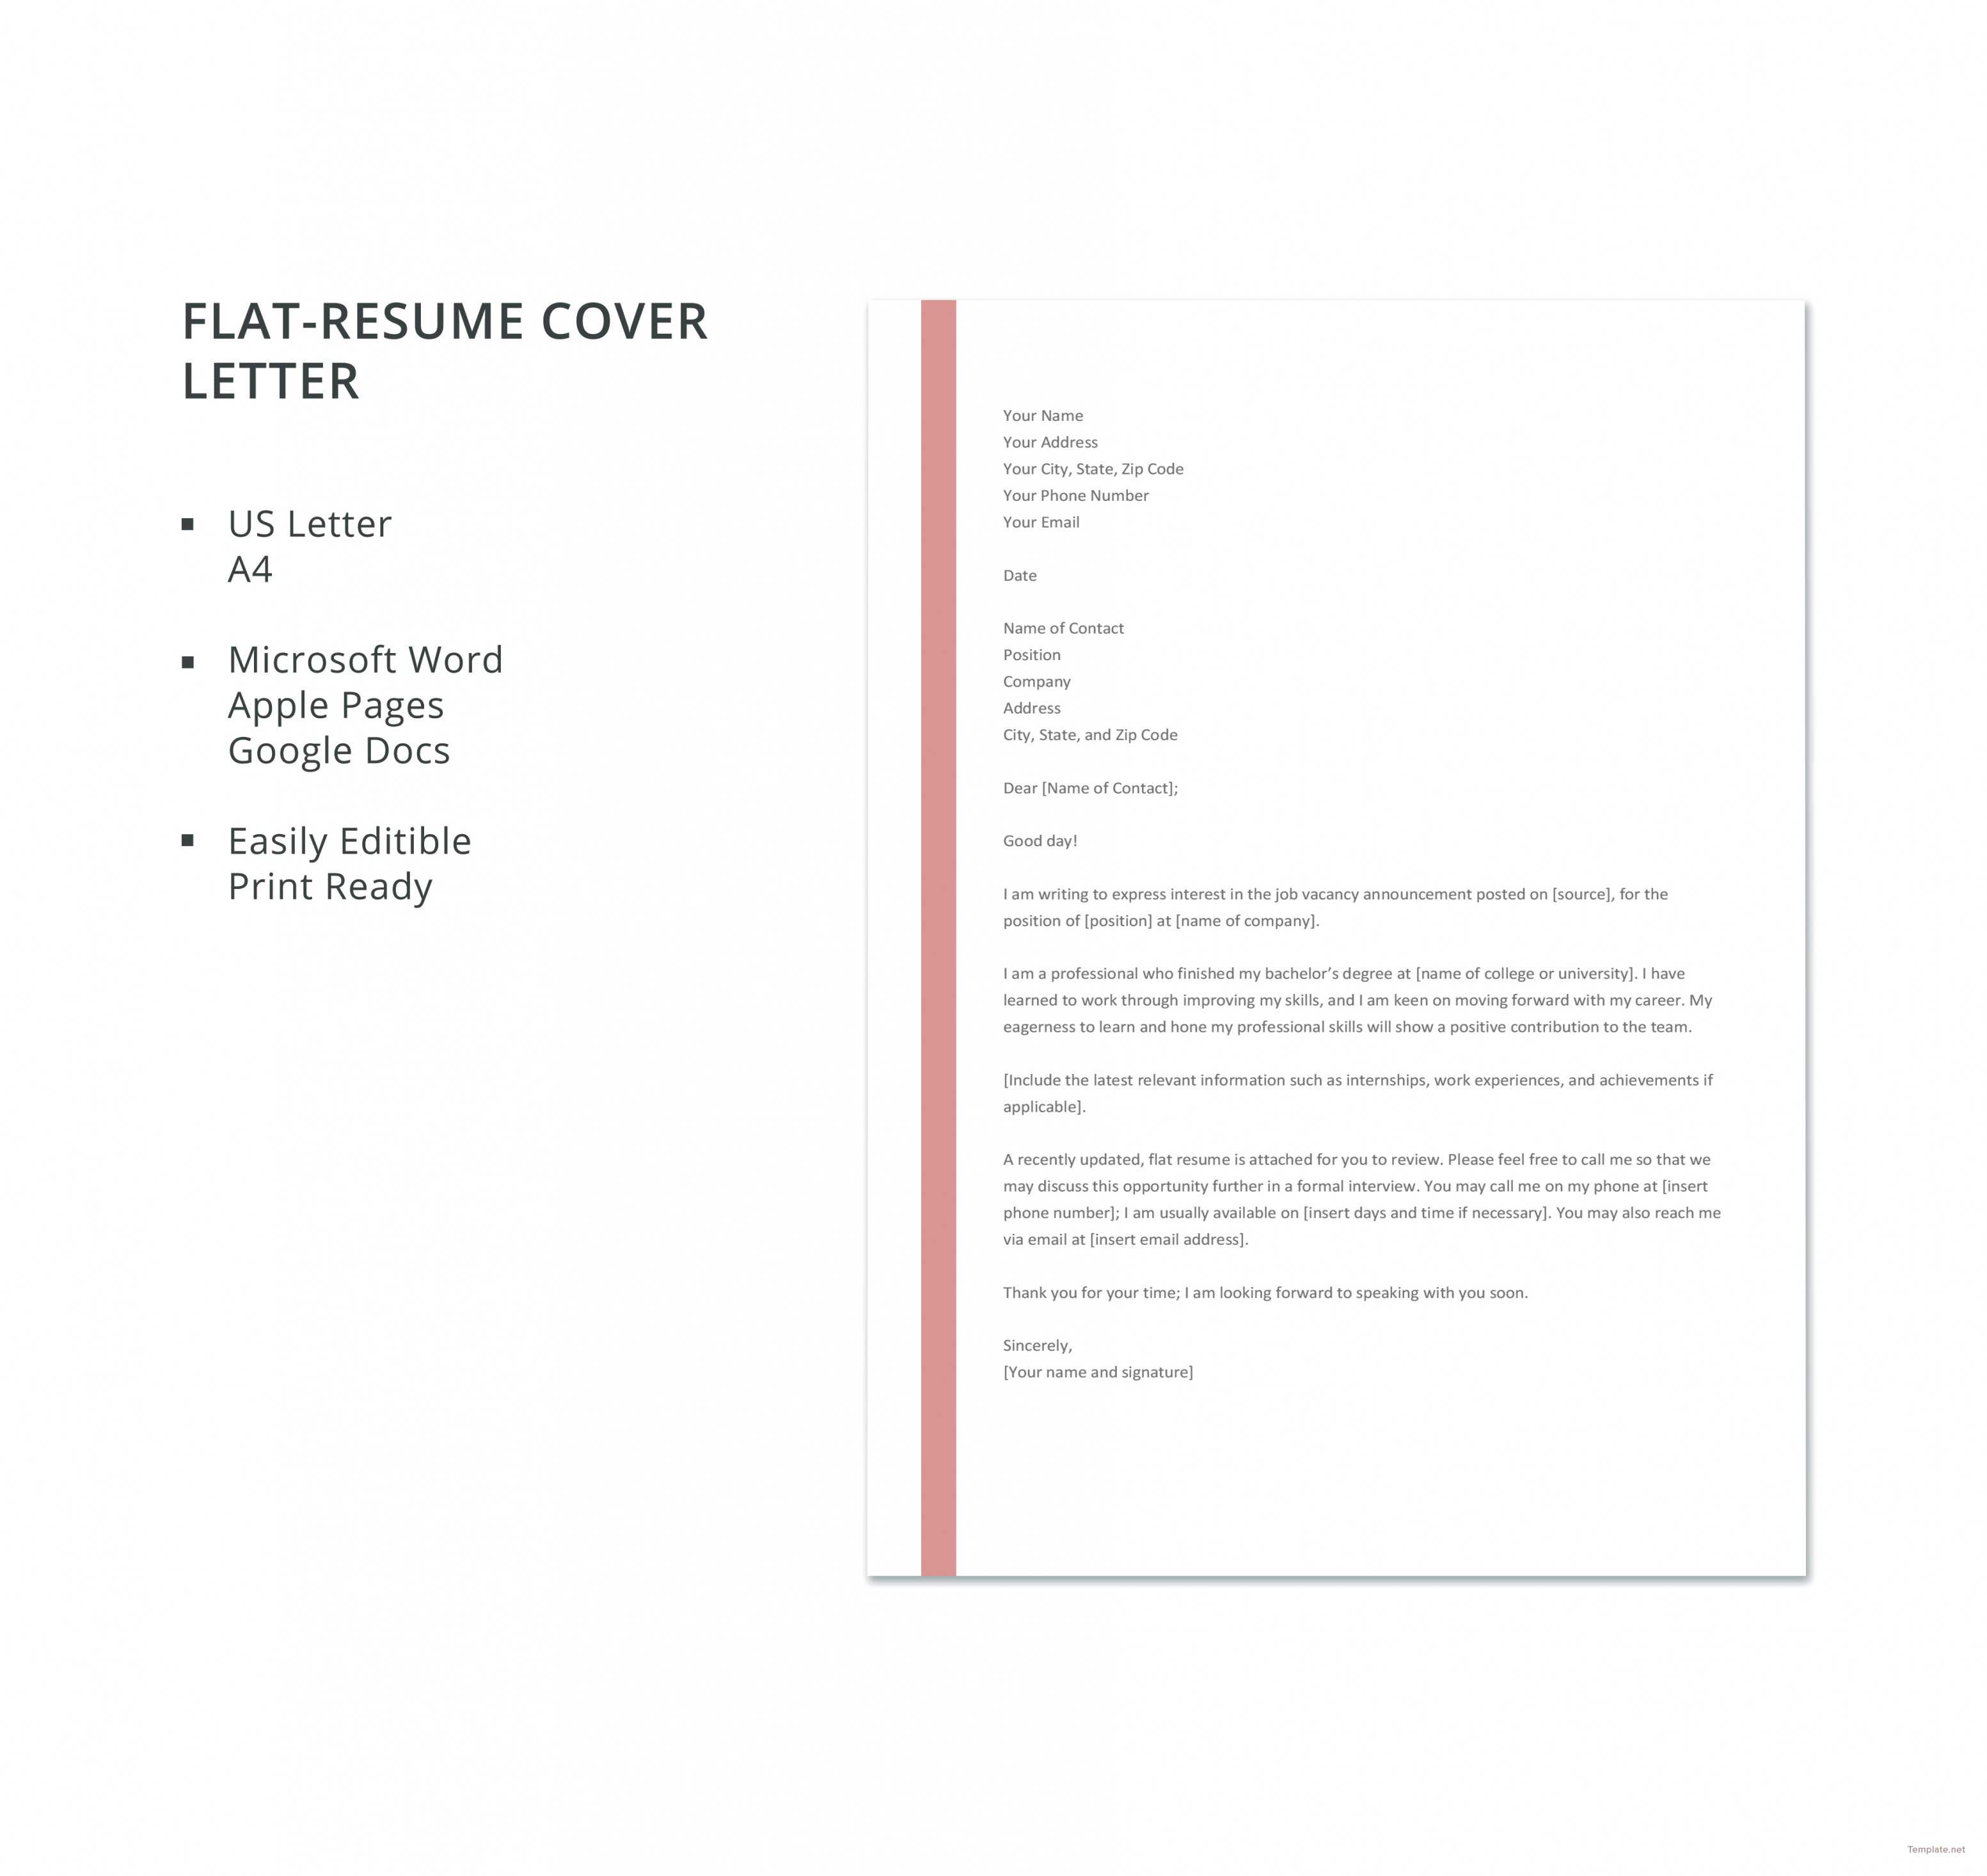 Professional Resume Templates Designs And Cover Letters Job Regarding Free Blank Resume Templates For Microsoft Word